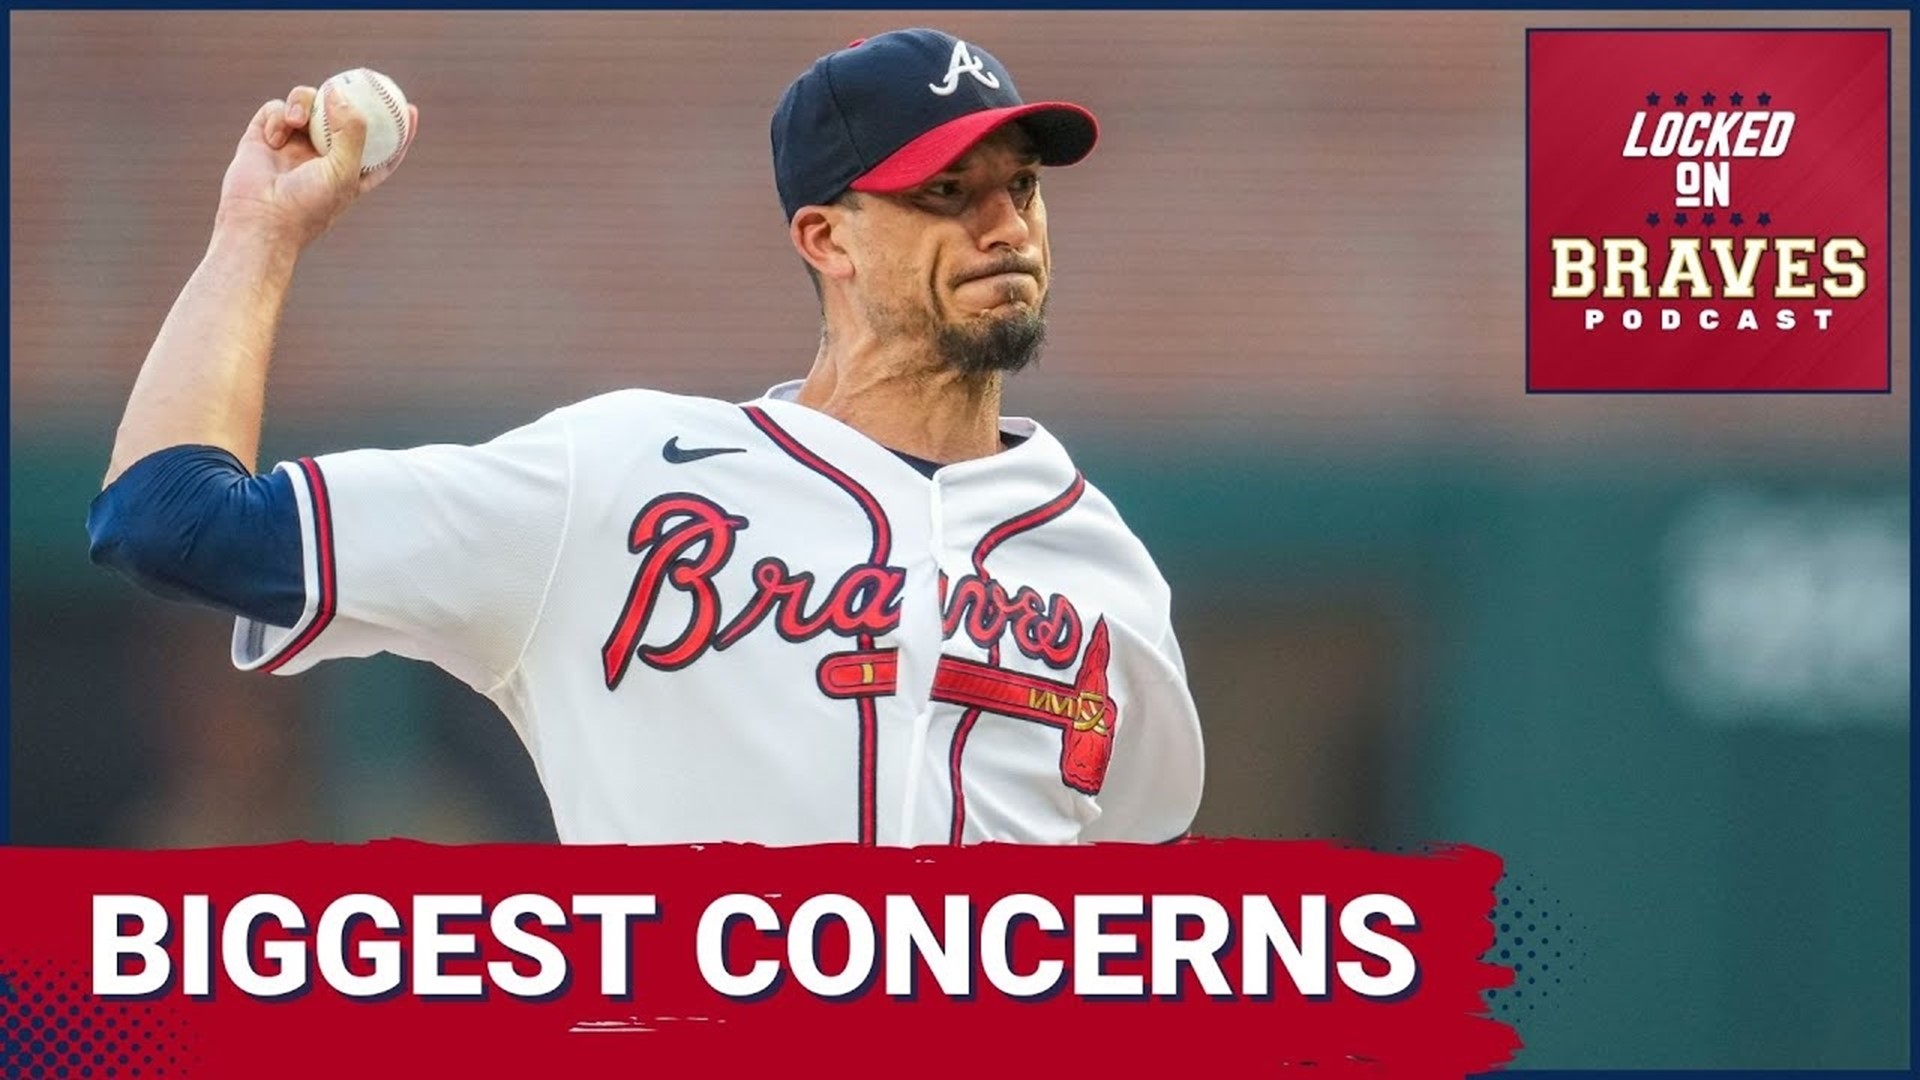 The Atlanta Braves have had a tremendous season, but there are some justified concerns – mainly in the pitching staff – going into the postseason.